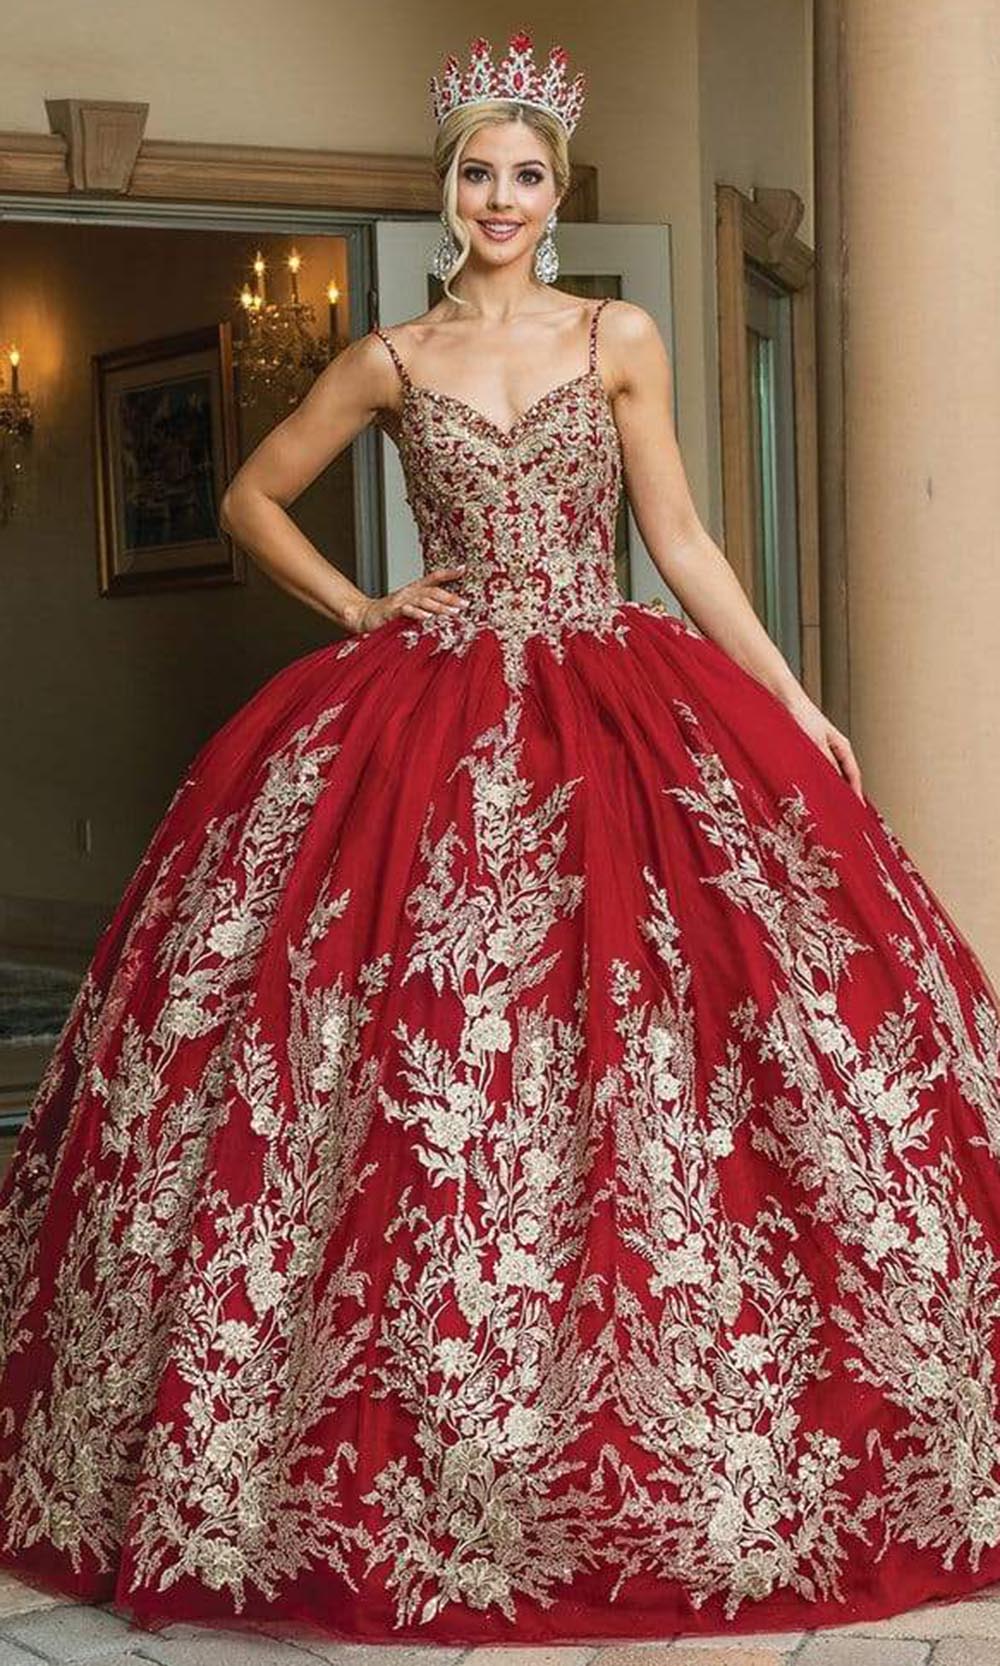 Image of Dancing Queen - 1616 Embellished Royalty Inspired Ballgown